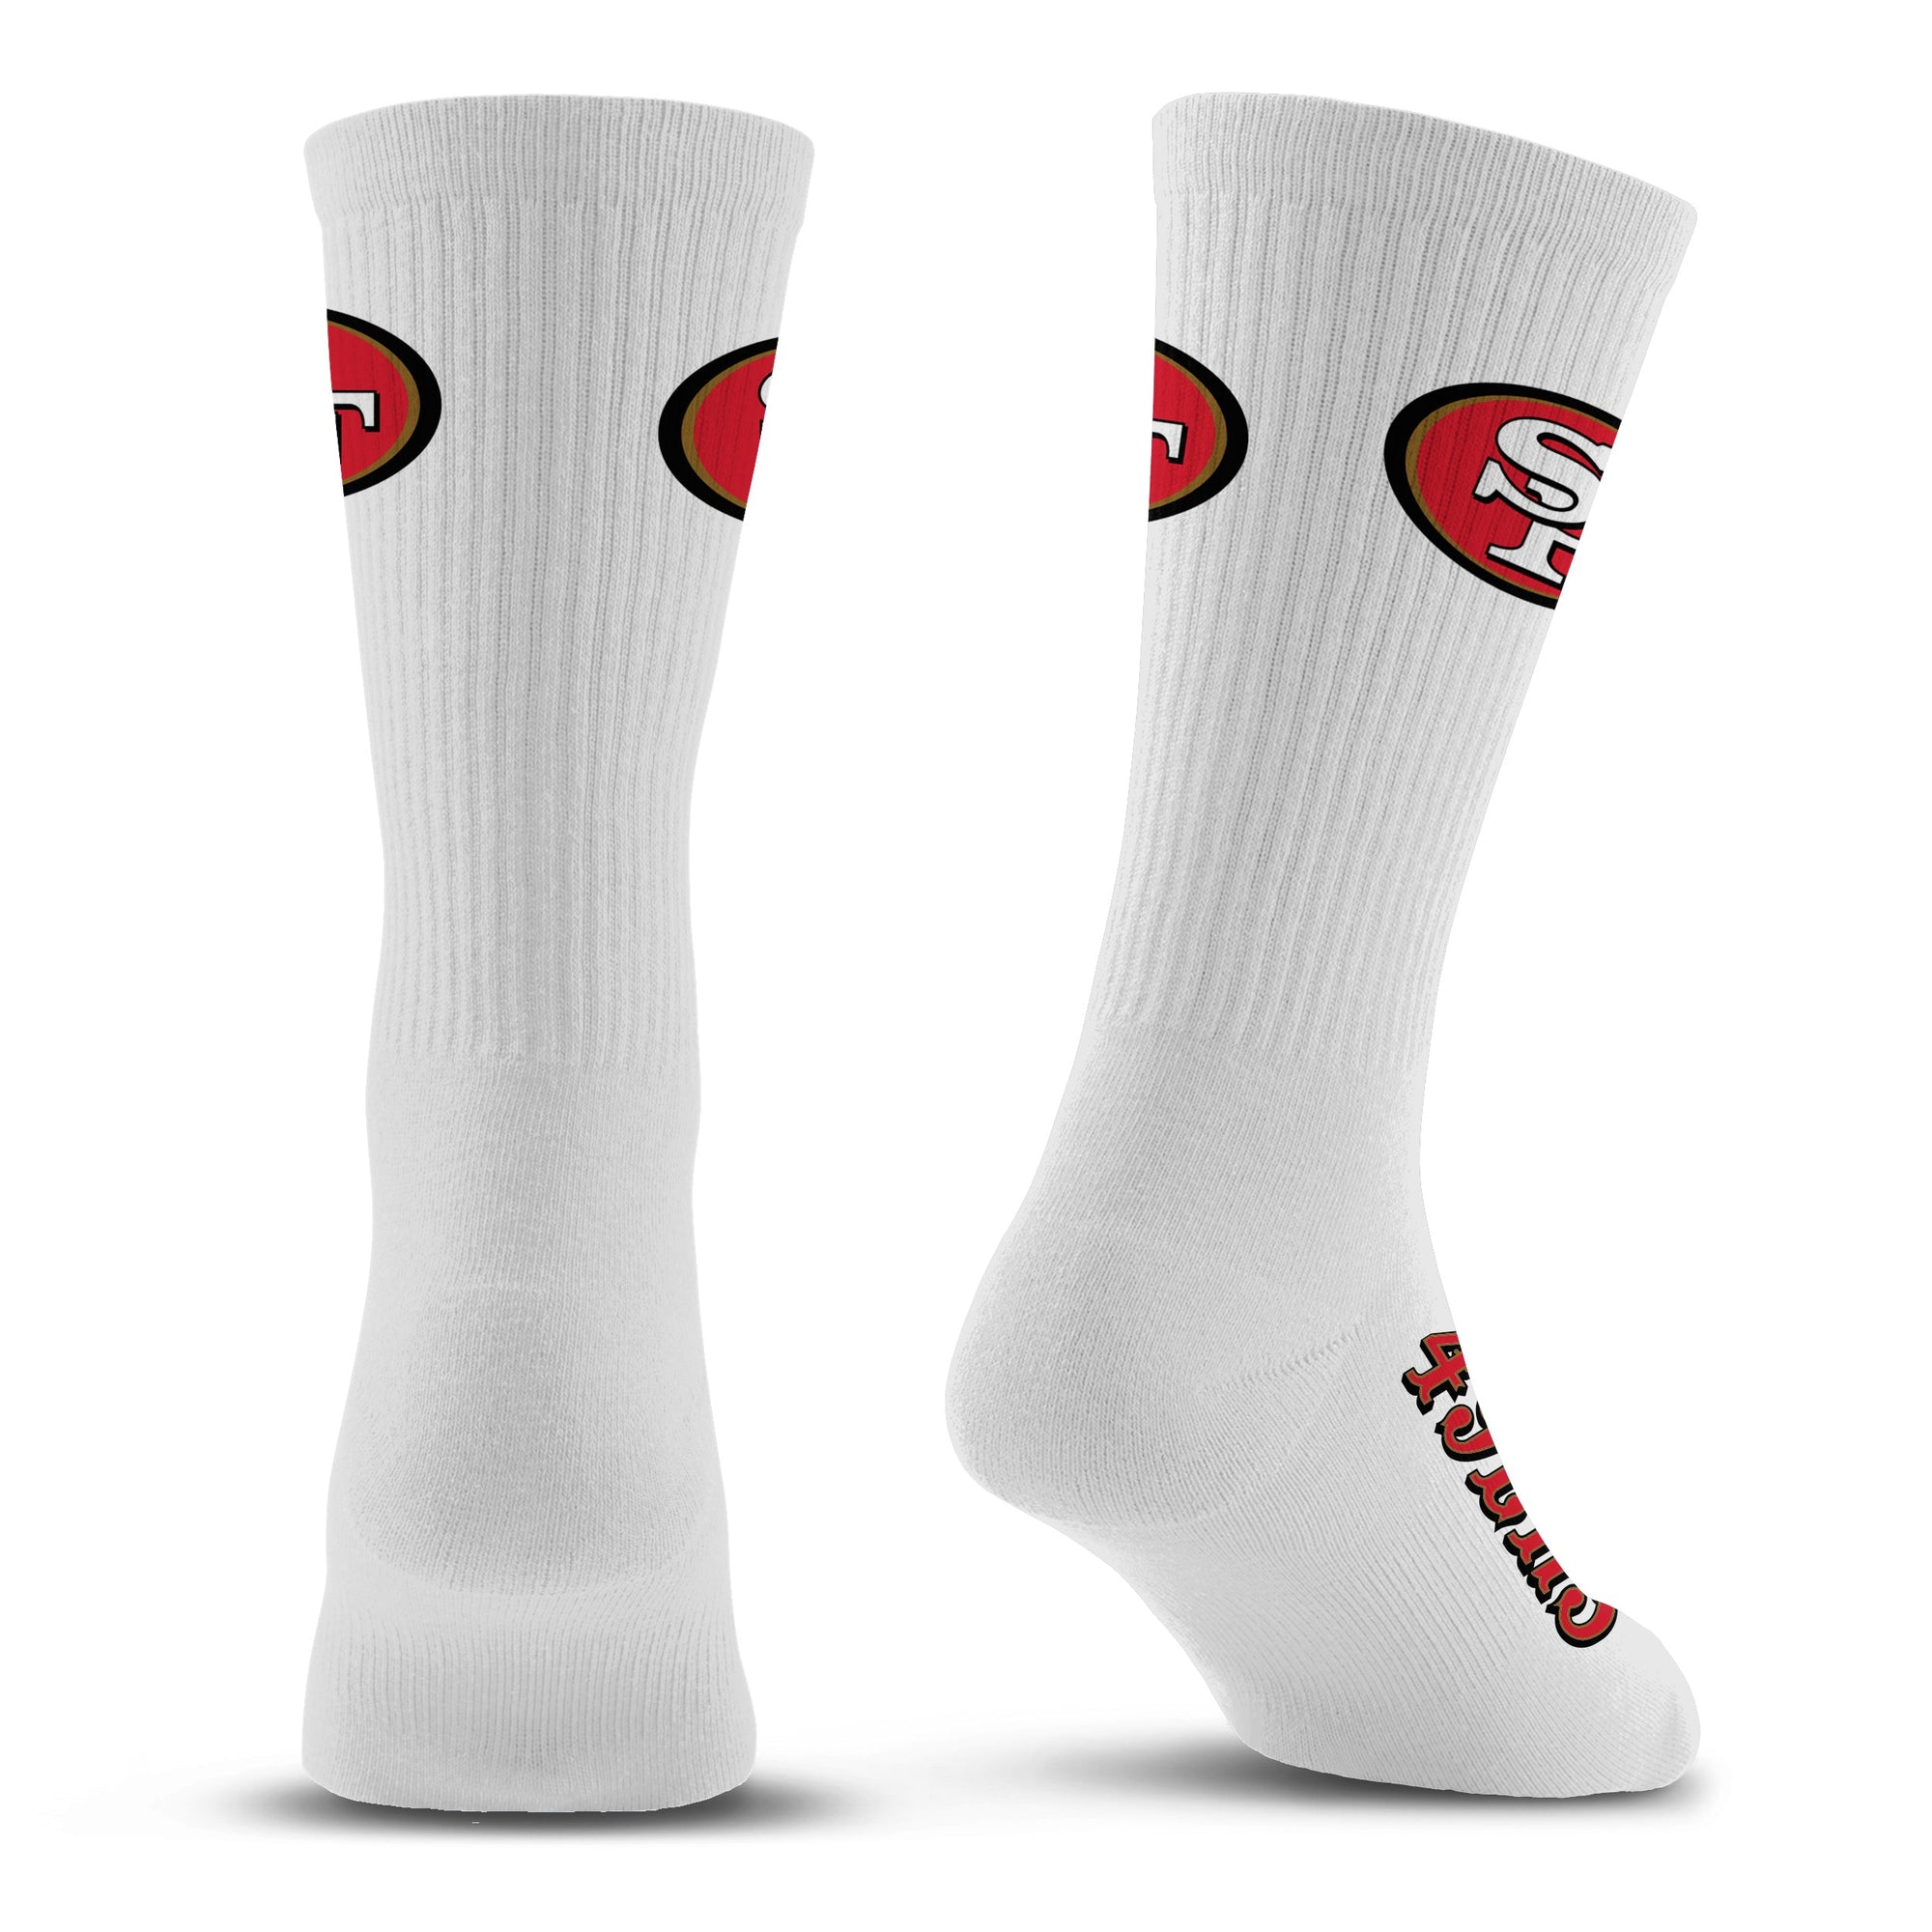 Three packs of 49ers socks for $20 at Costco in San Jose. Each